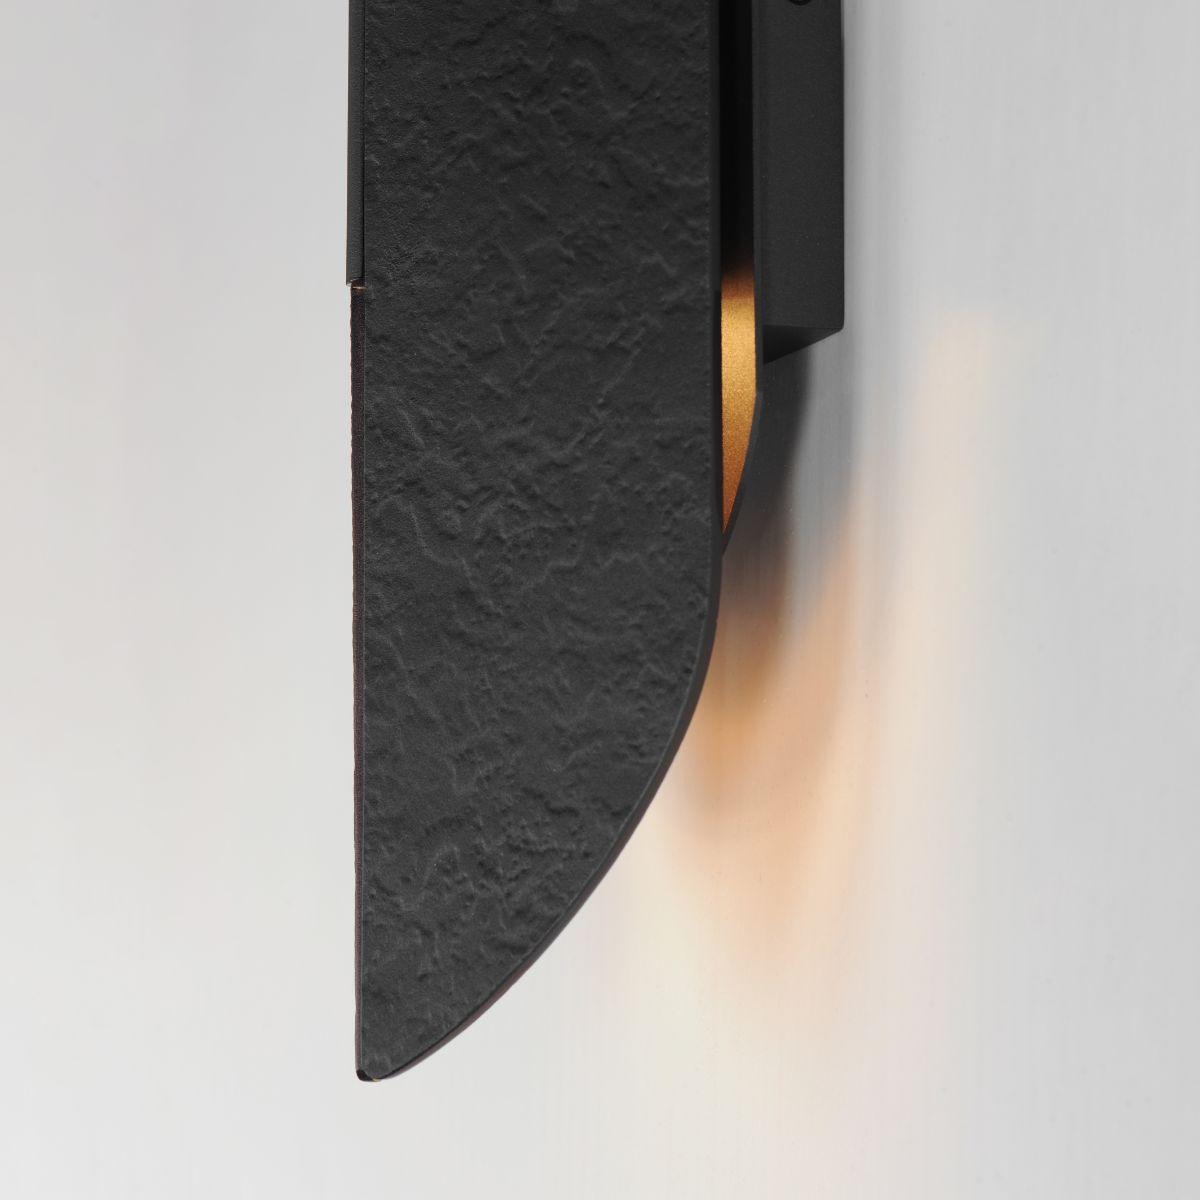 Tectonic 18 in. LED Outdoor Wall Sconce 3000K Black Finish